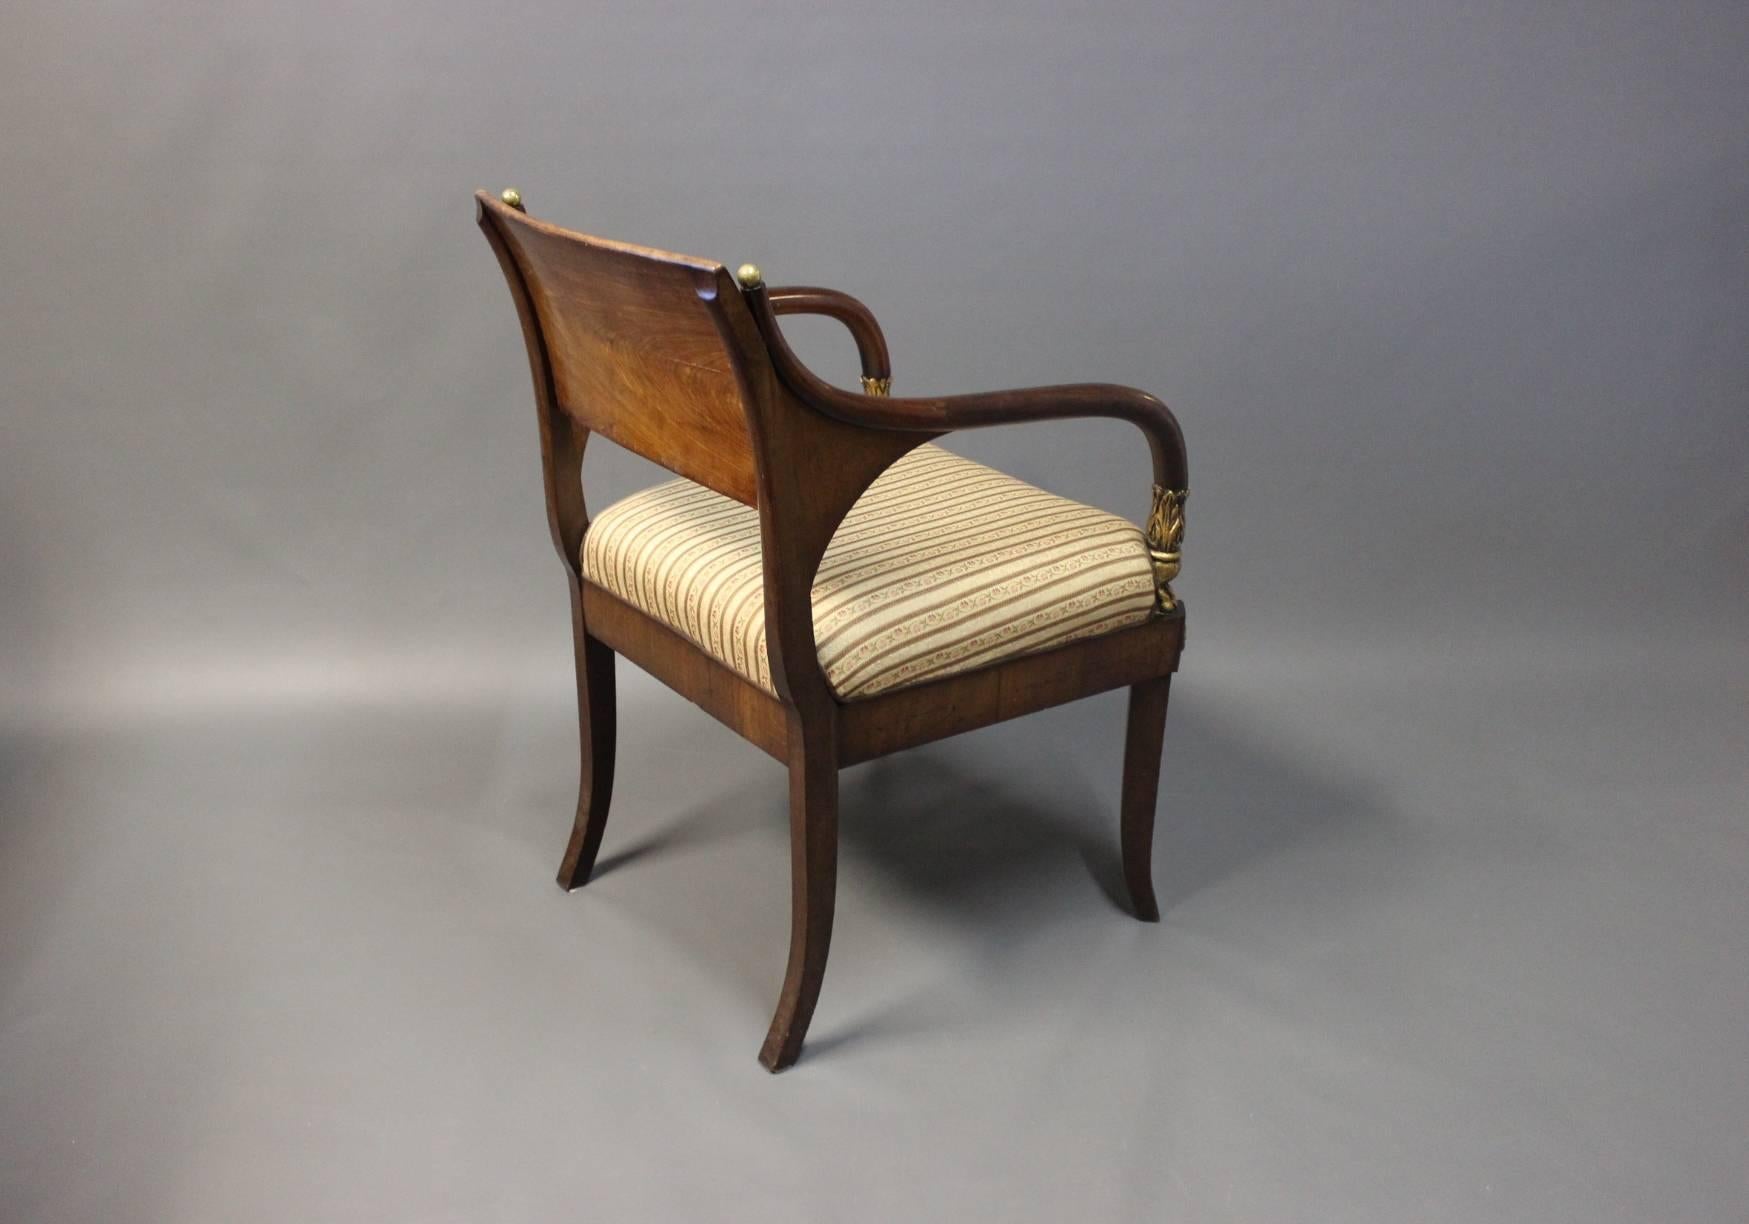 Other Armchair in Polished Mahogany Decorated with Brass and Leaf Gold, 1830